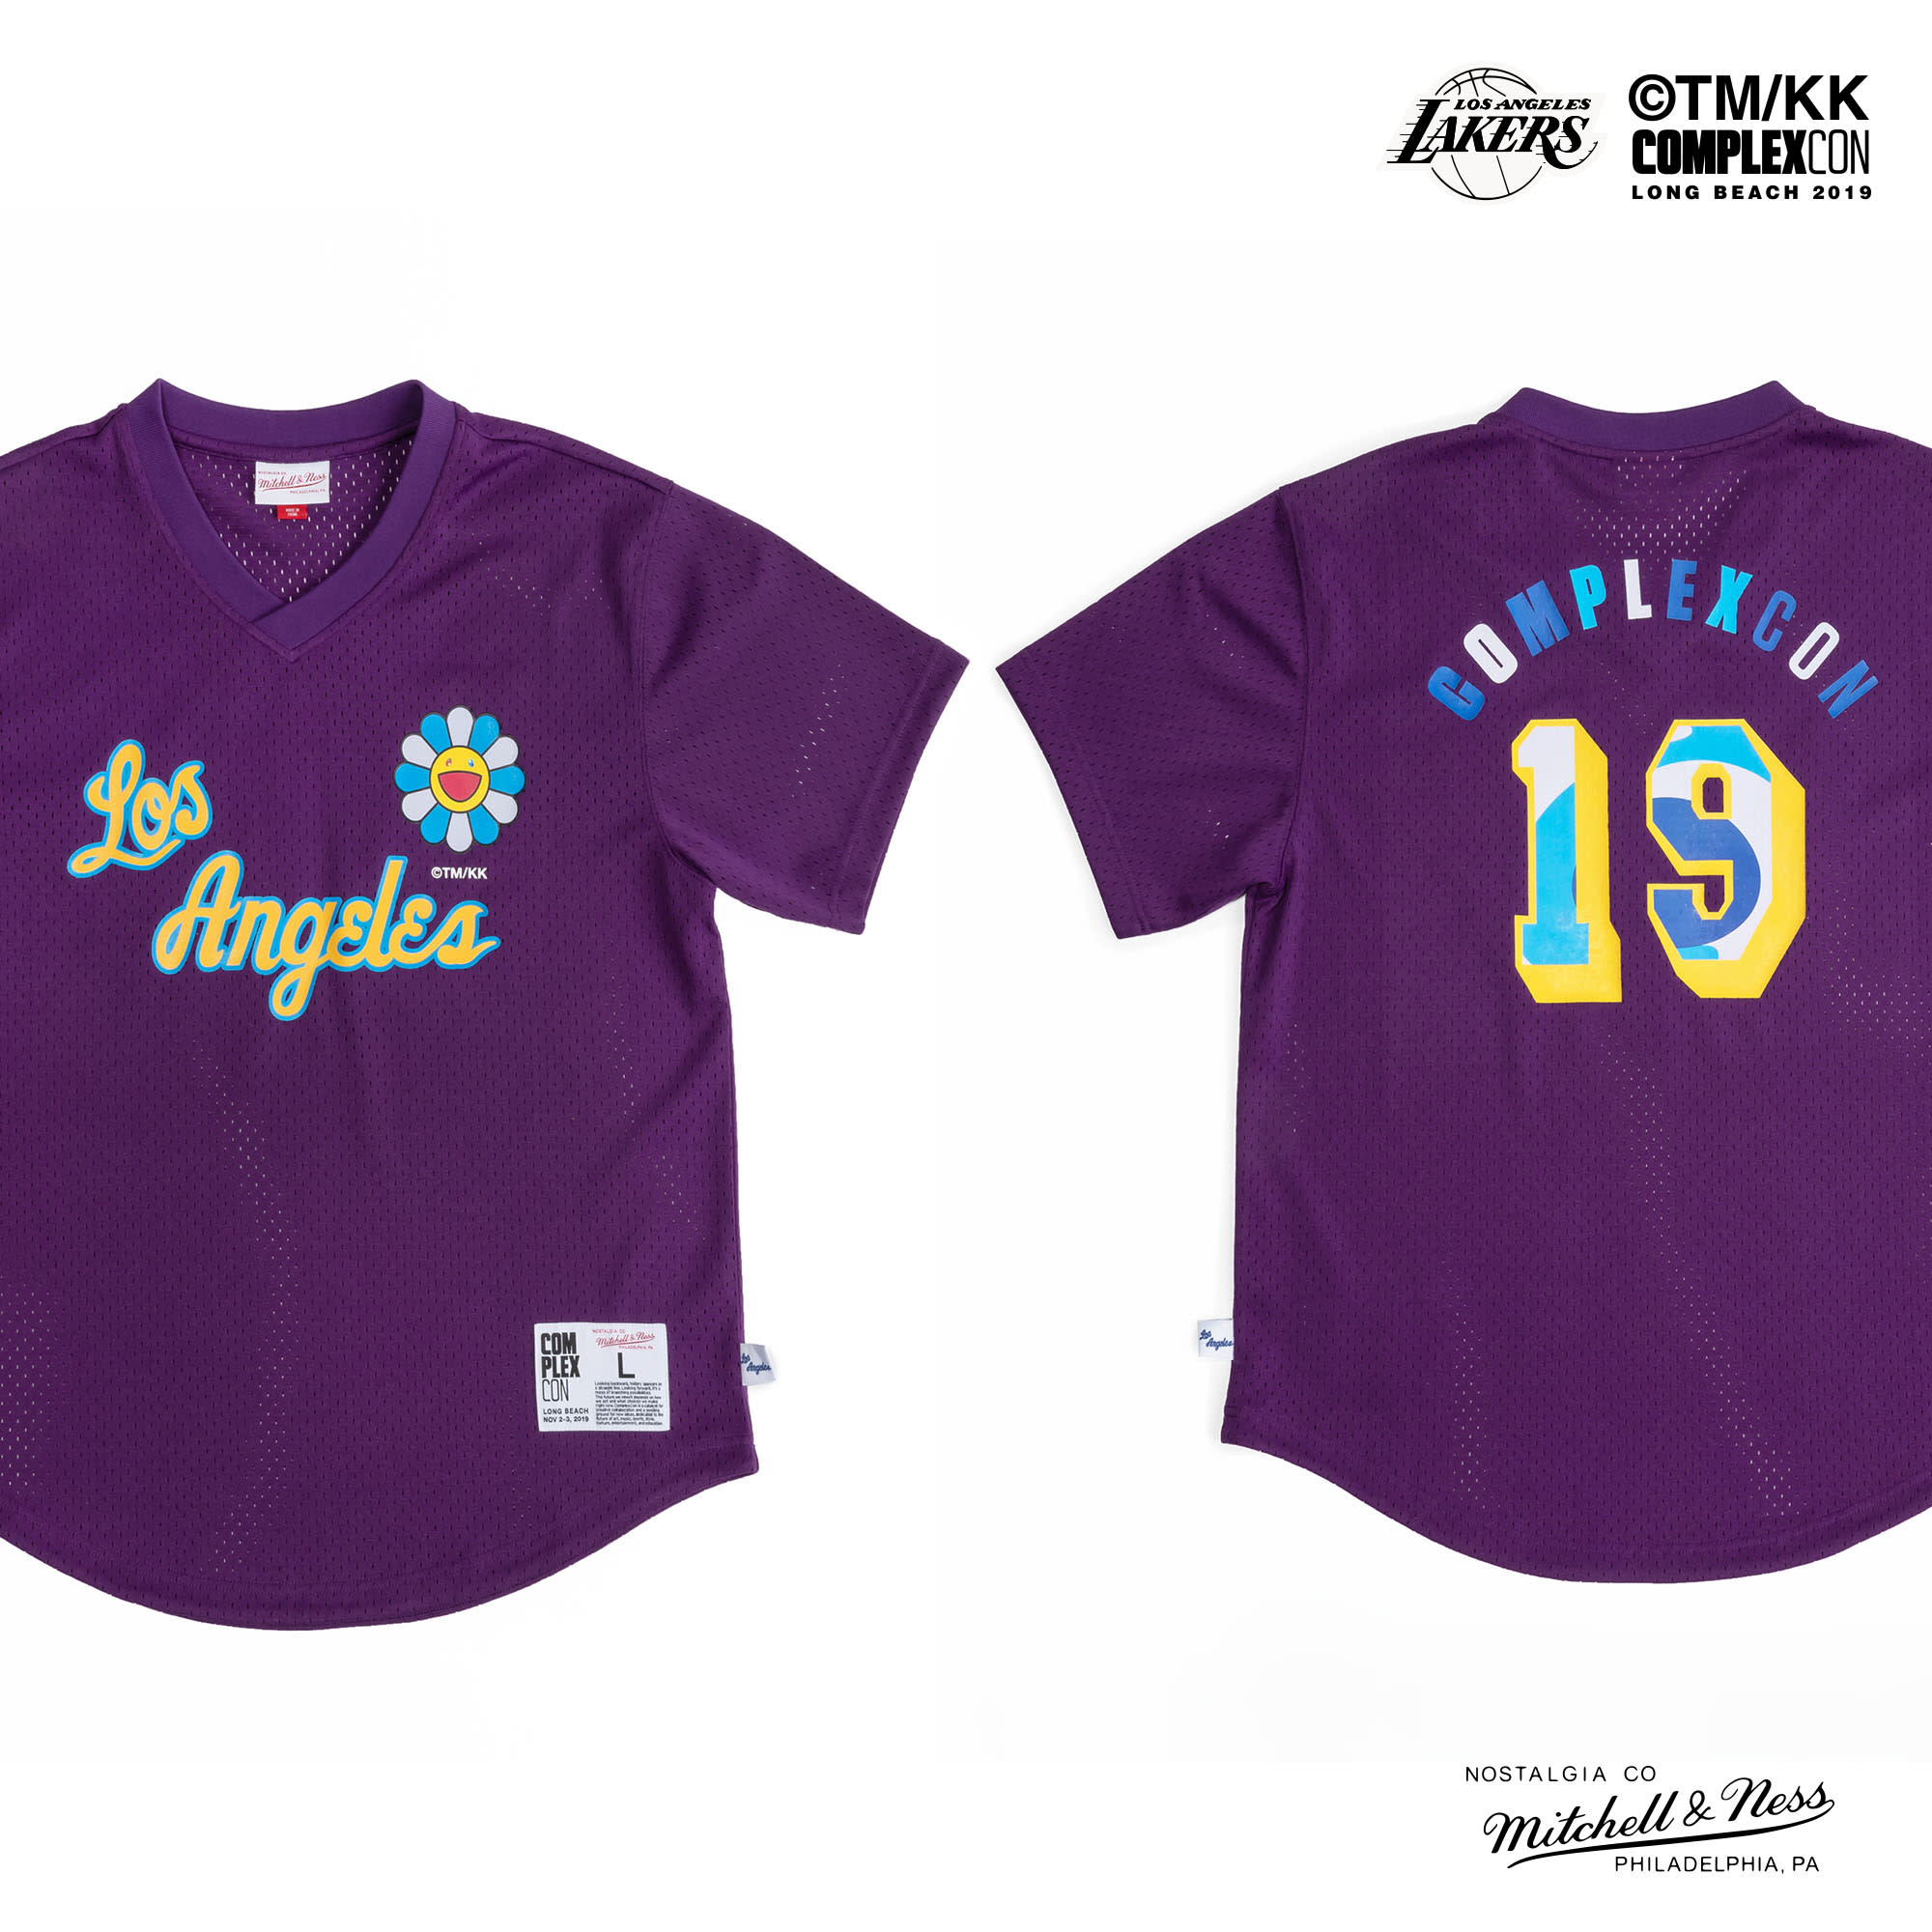 Takashi Murakami Designs Los Angeles Lakers Merch for ComplexCon 